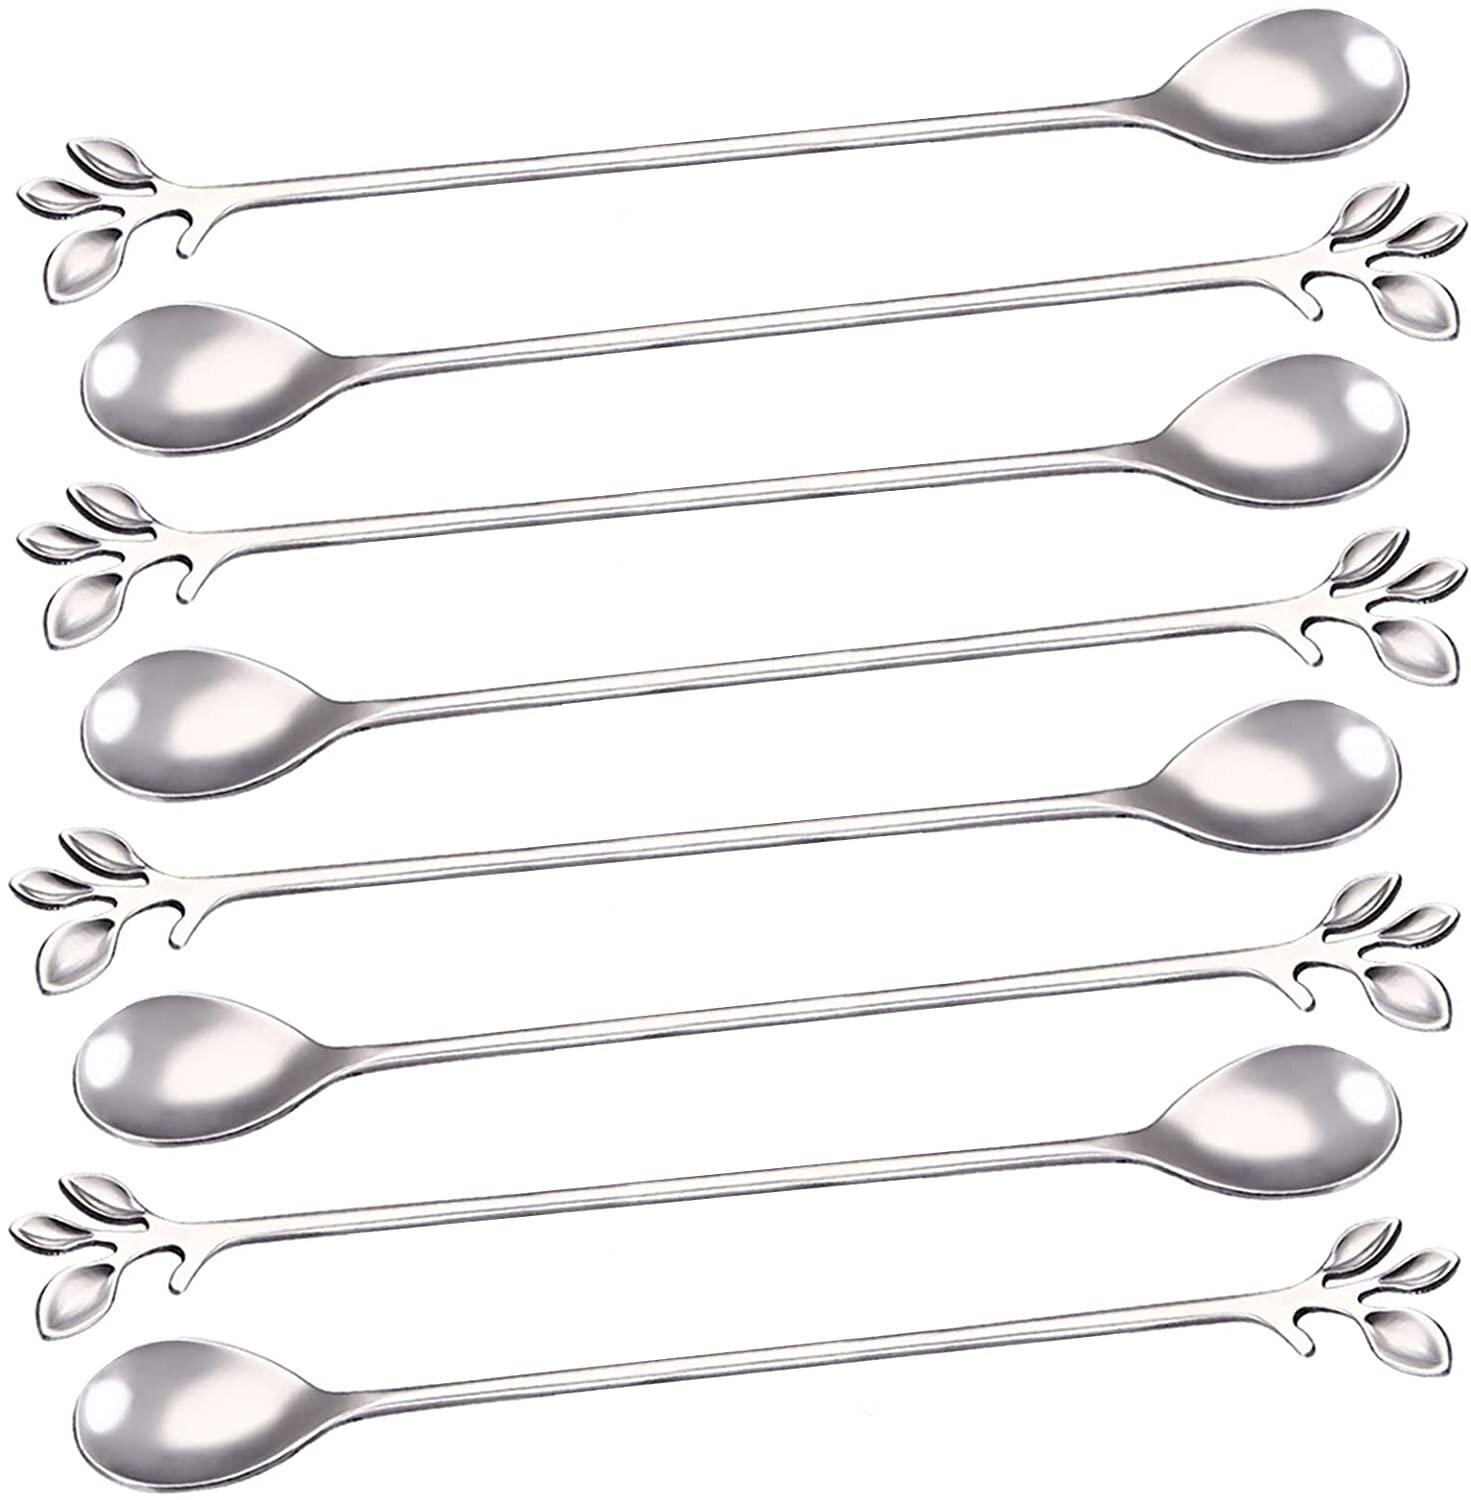 Home  Shaker Stirrer Long Handle Stainless Steel Mixing Stir Bar Cocktail Spoon 